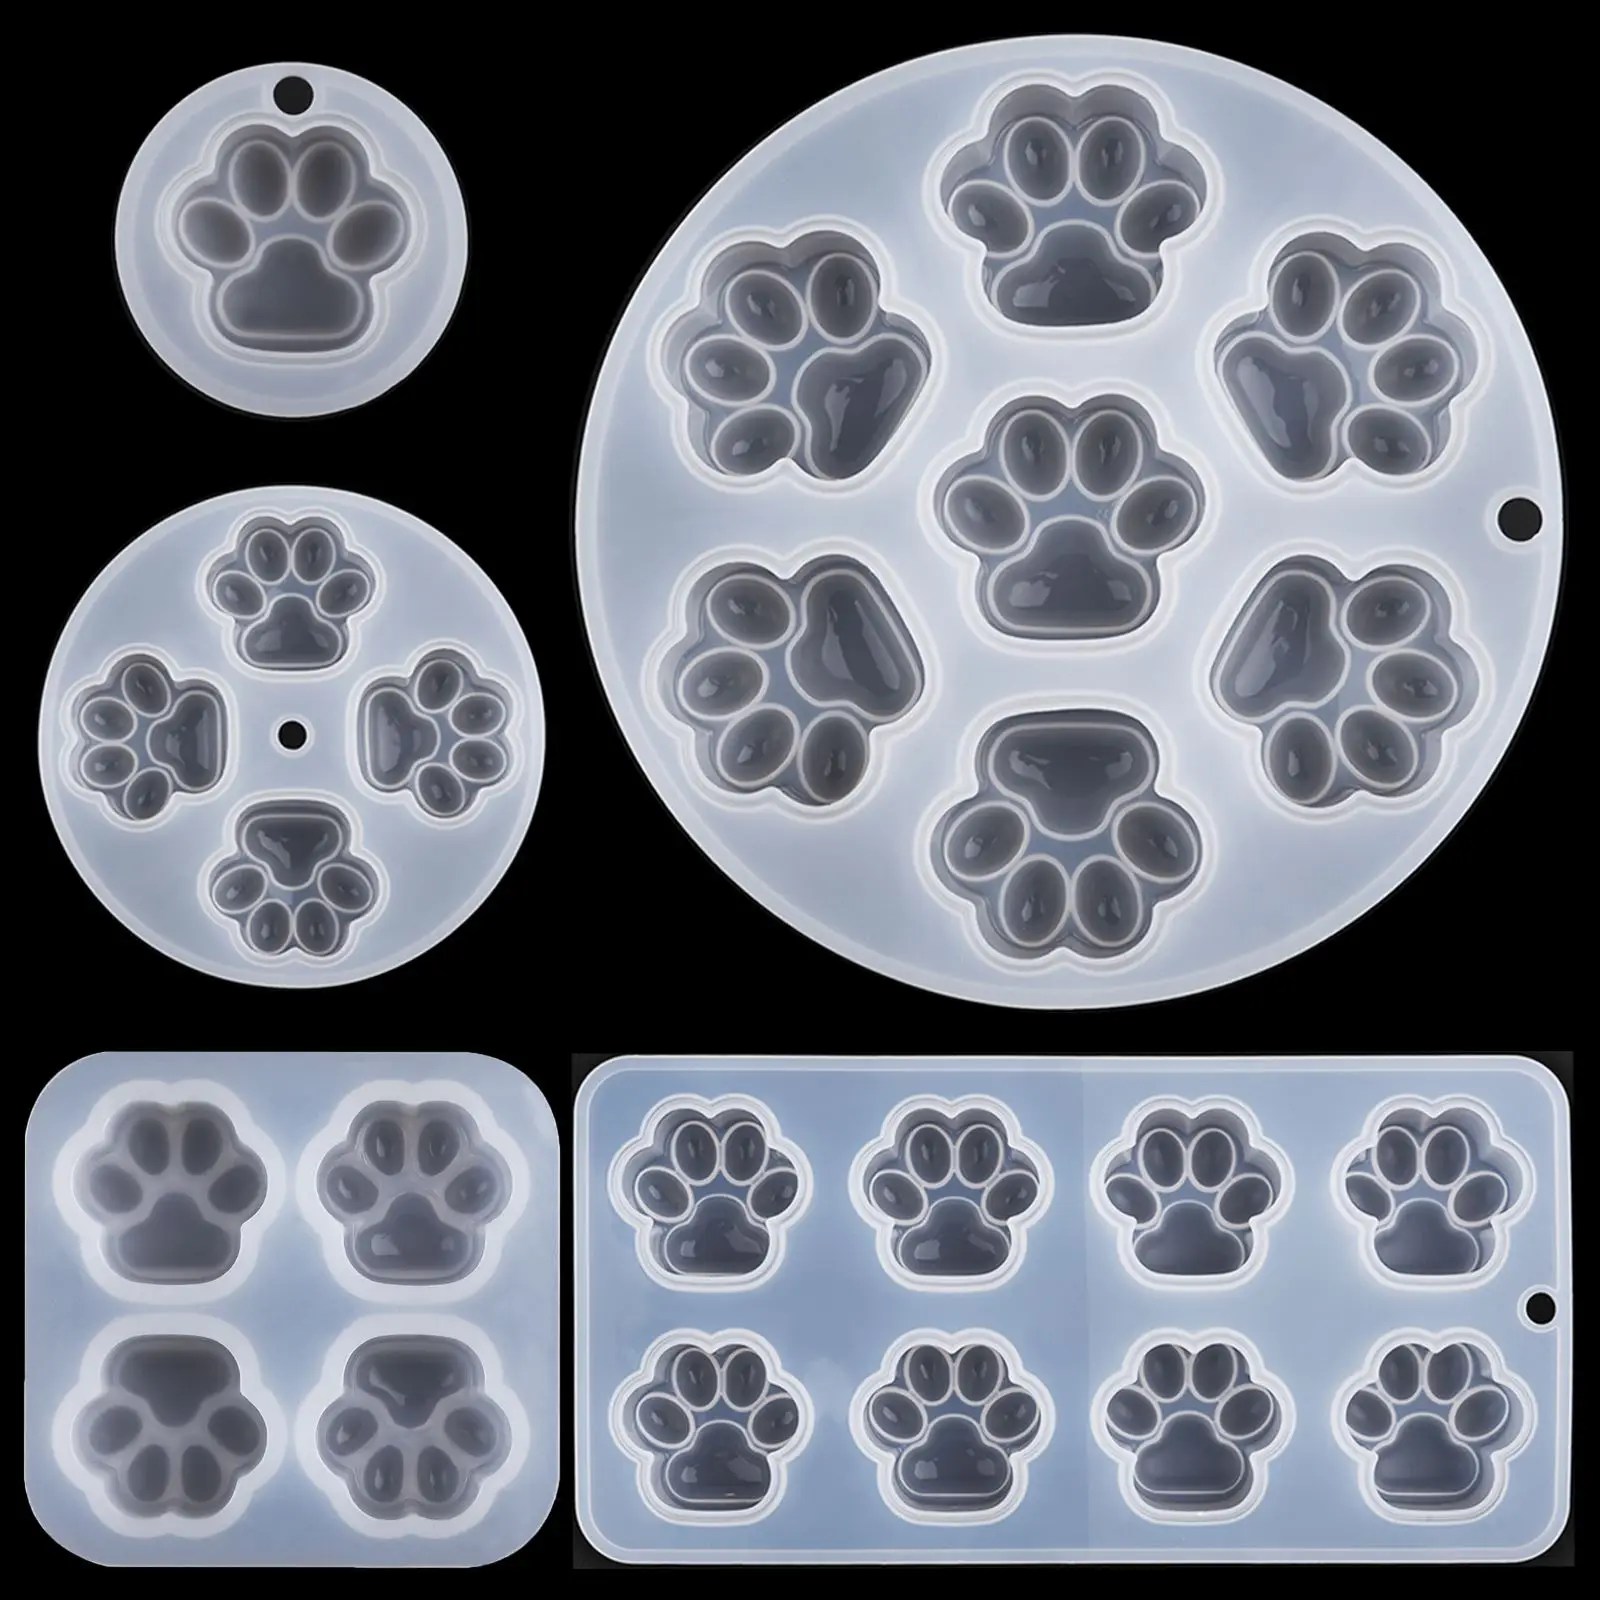 

Cat Paw Pendant Silicone Mold Keychain Pendants Epoxy Resin Molds For DIY Epoxy Resin Crafting Mould Jewelry Making Crasfs